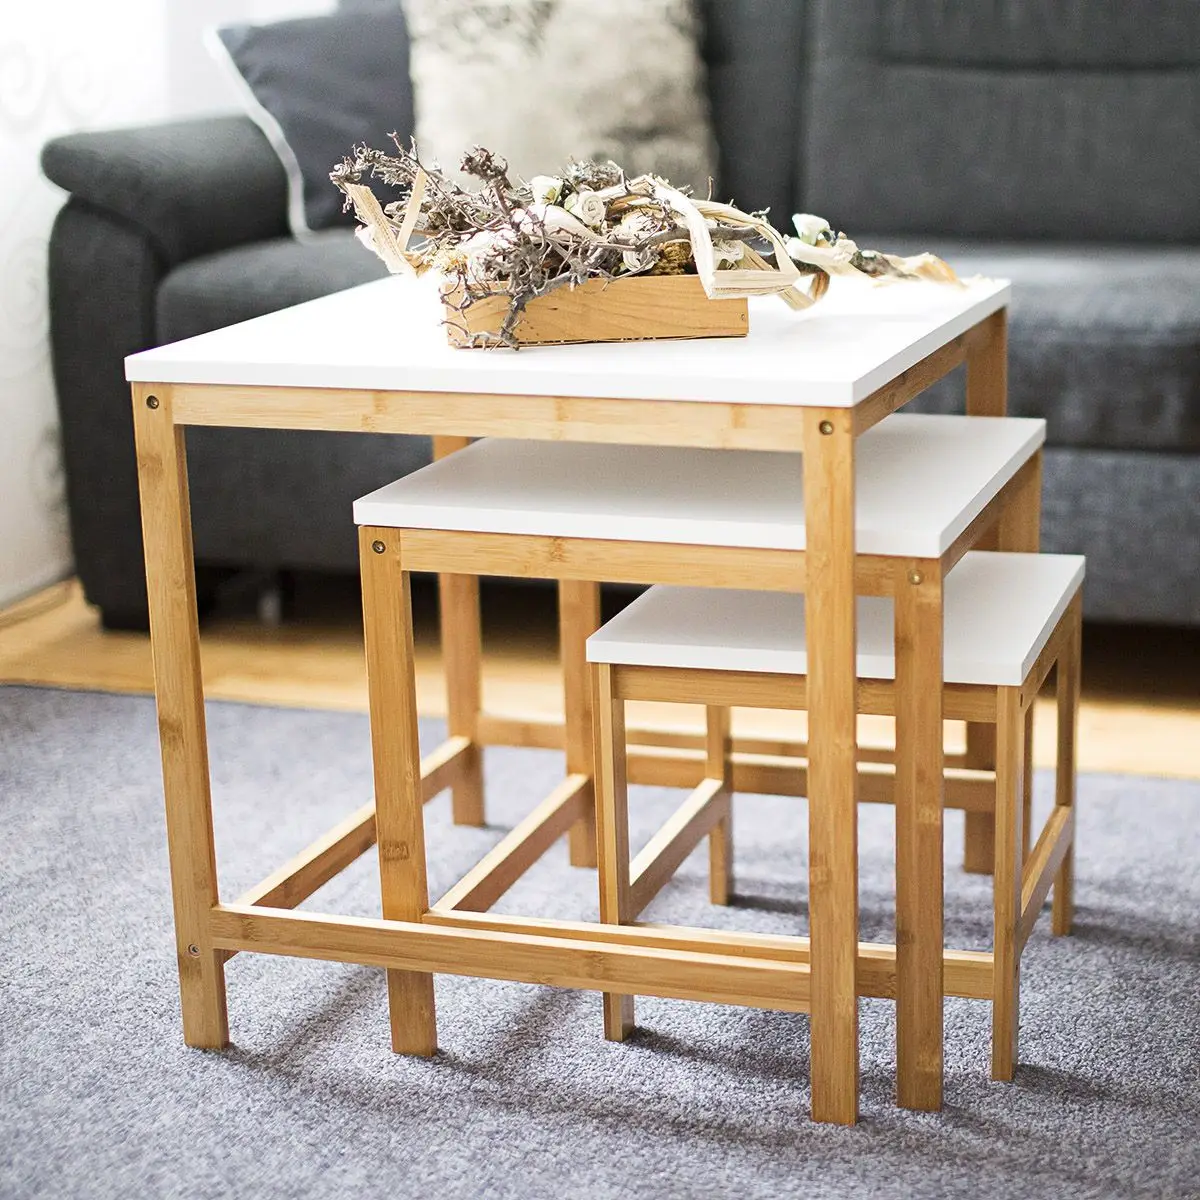 Living Room Bamboo Furniture Space-Saving Square Nesting Side Table Set